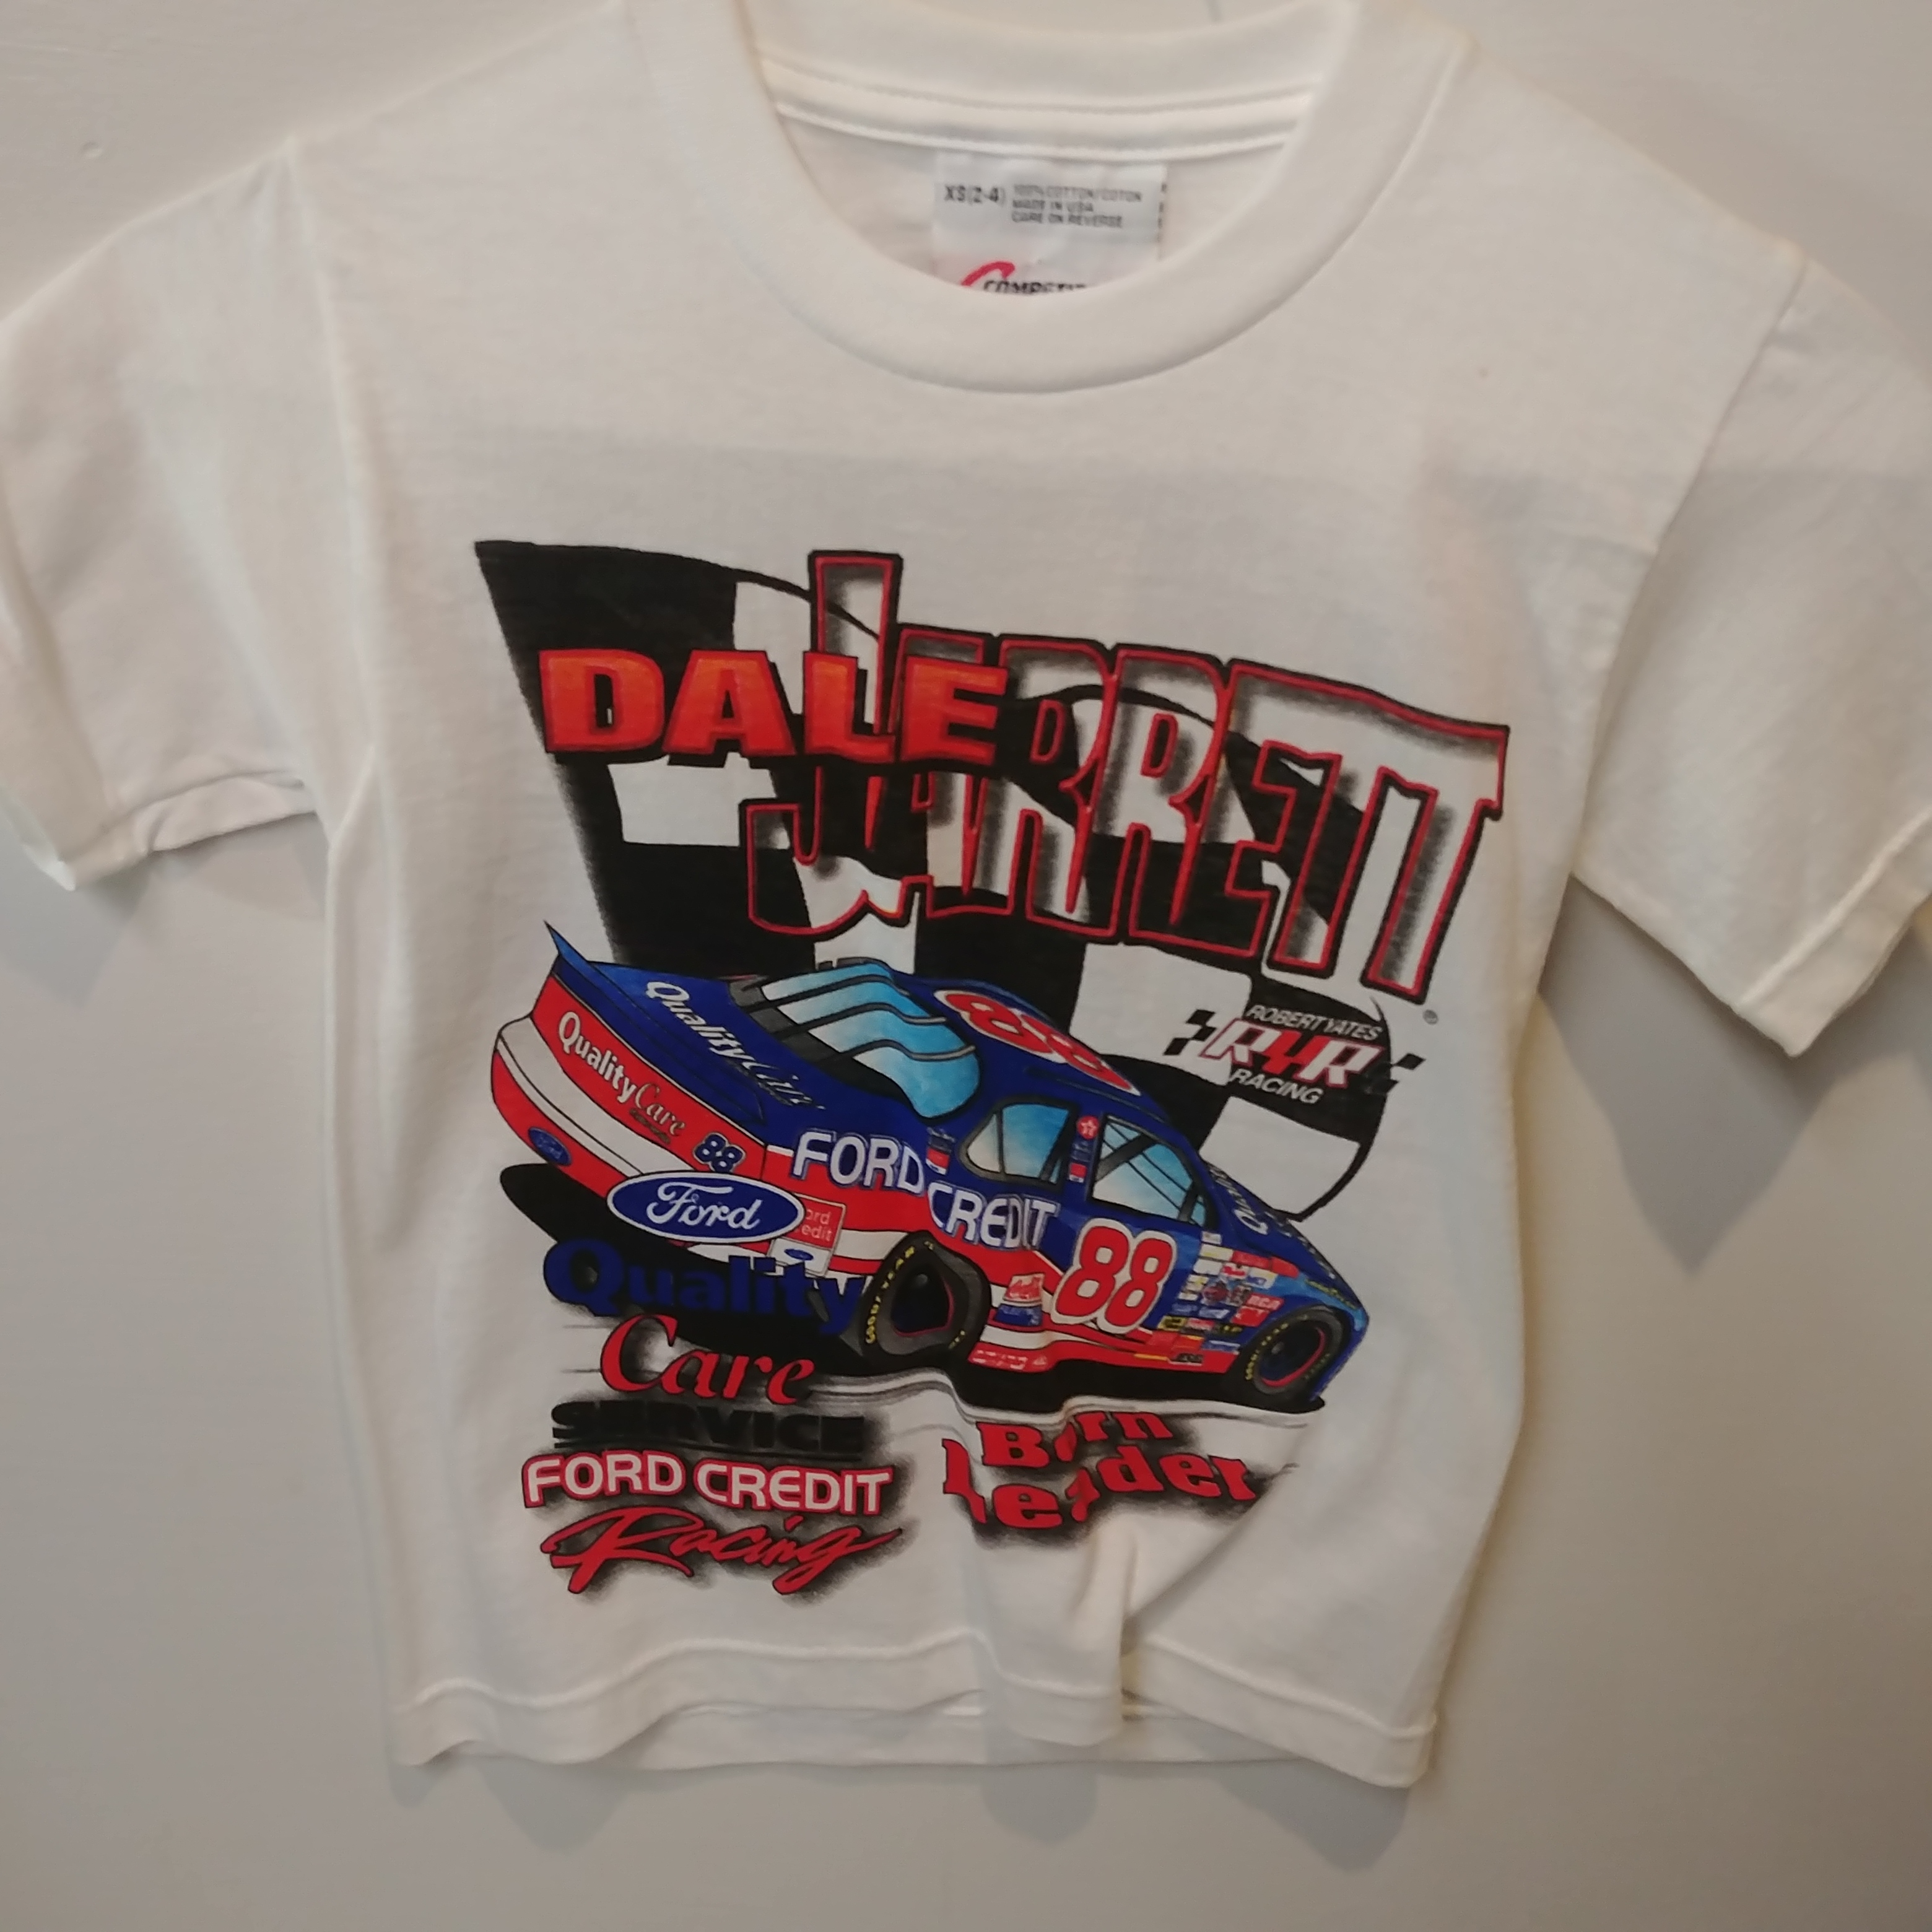 1998 Dale Jarrett Ford Quality Care "Born Leader" youth tee